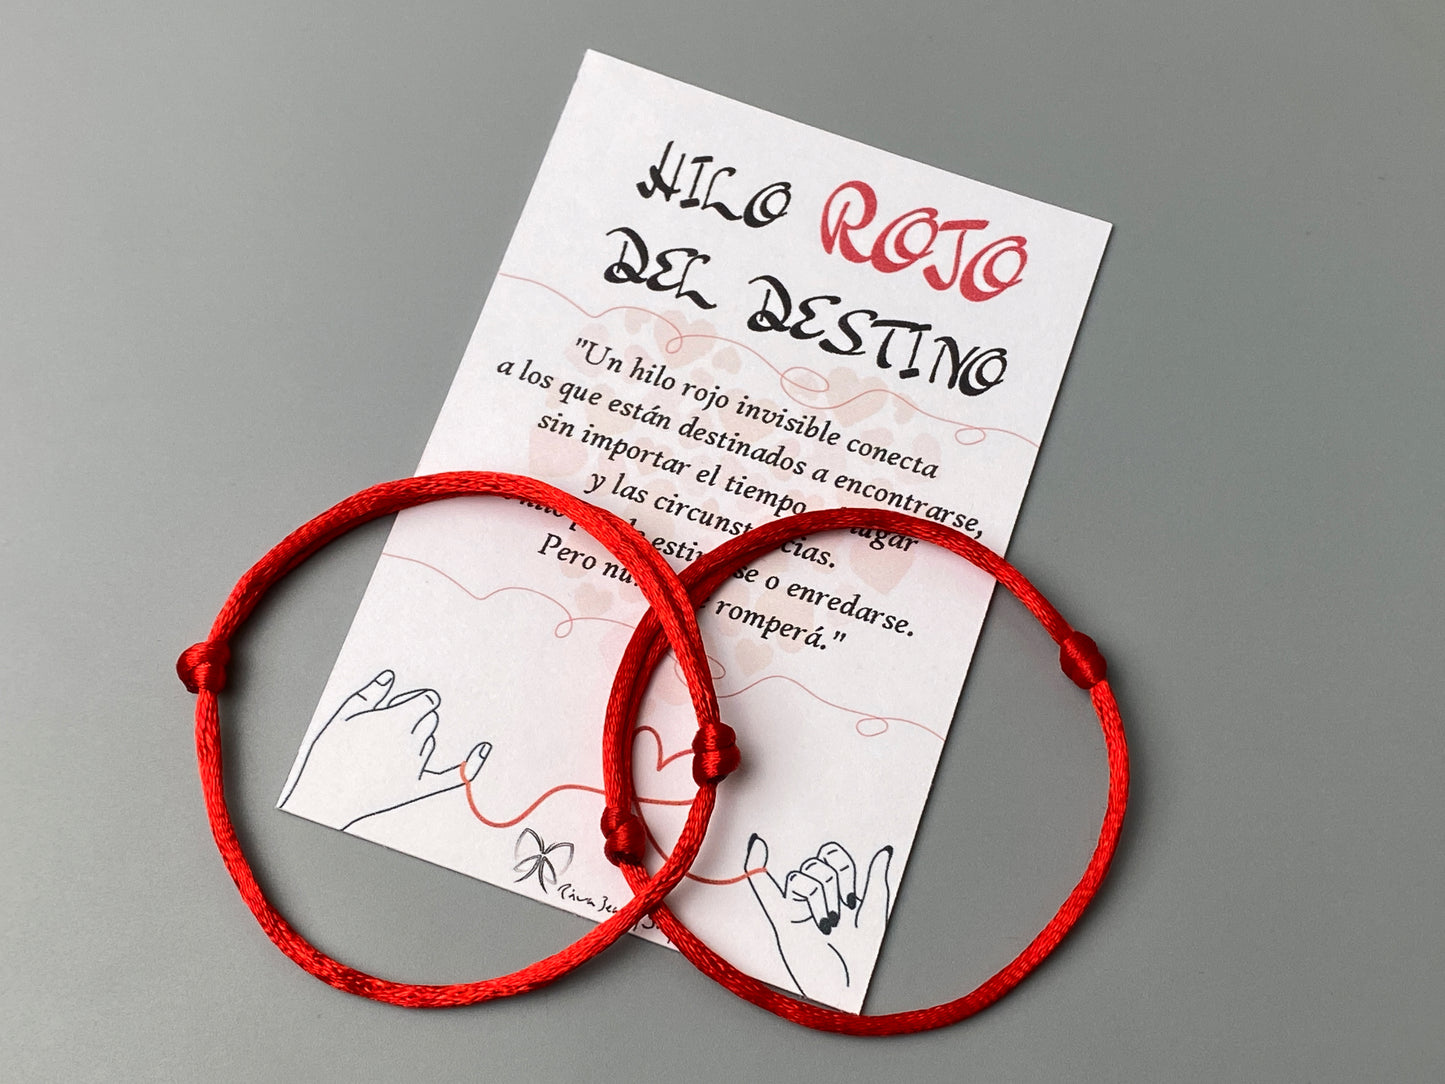 Red thread of destination, pair bracelet with card, red thread bracelet